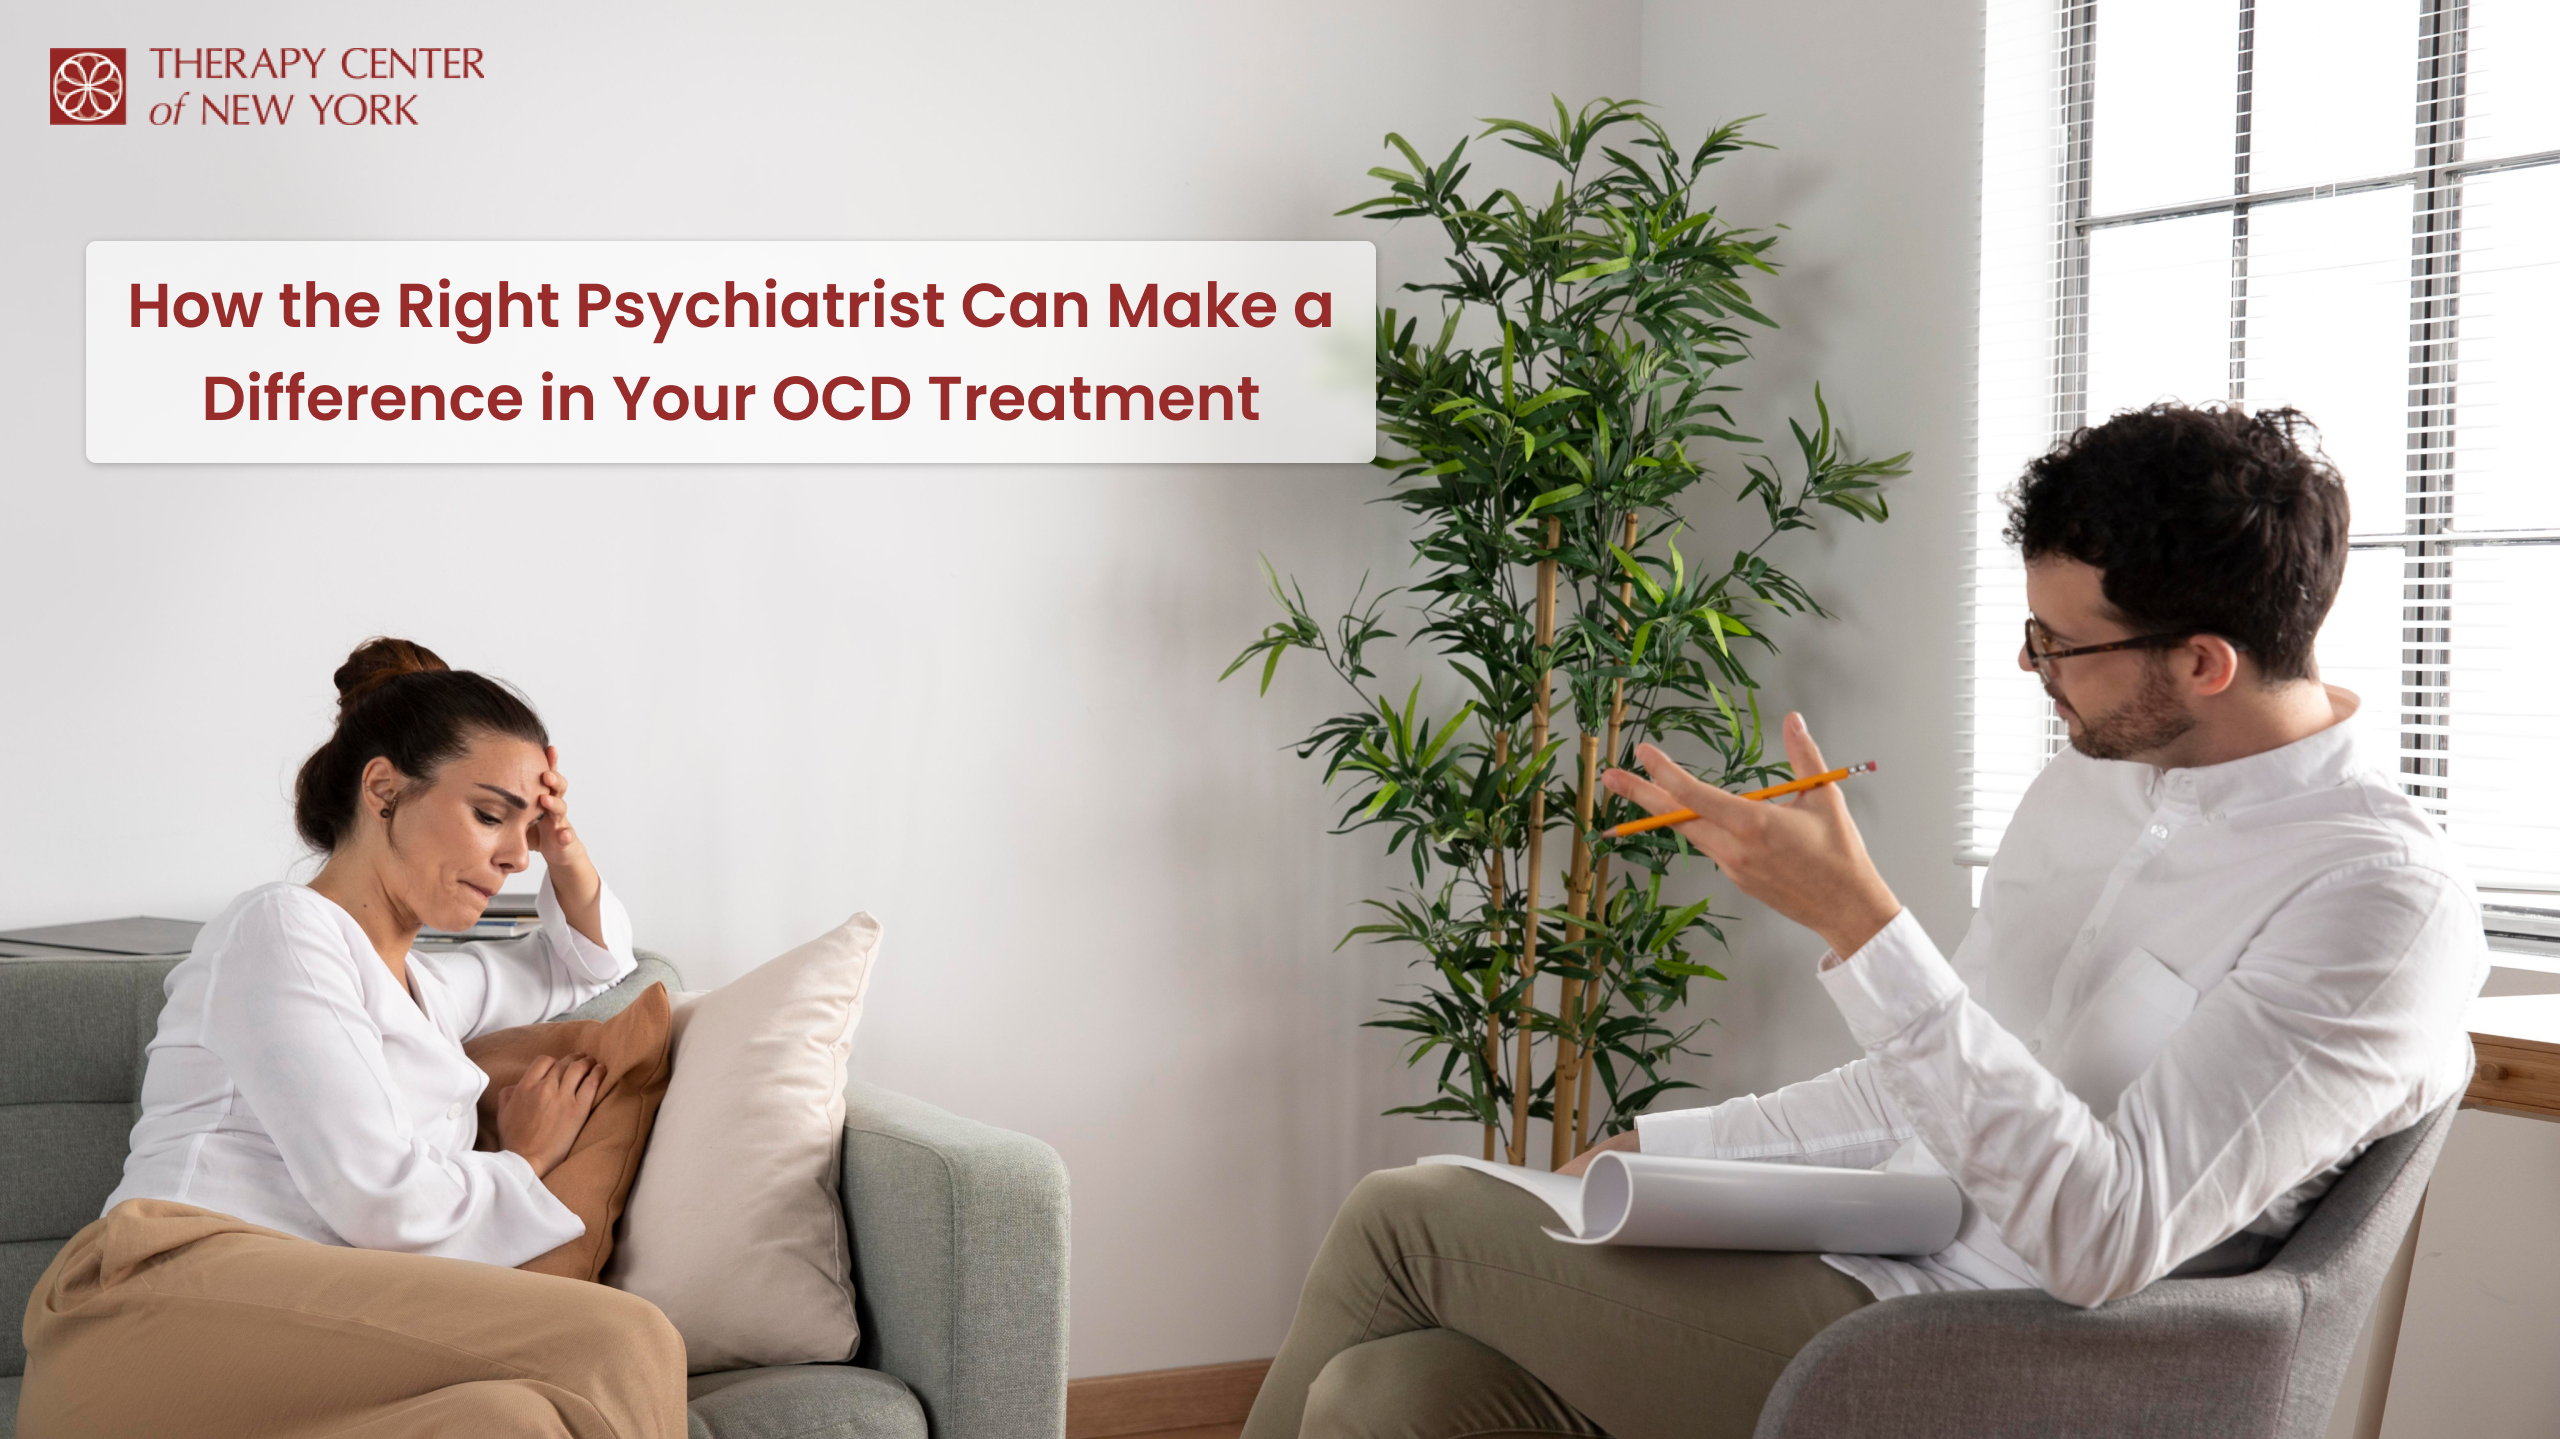 Effective OCD treatments include CBT, specifically ERP, and medication.